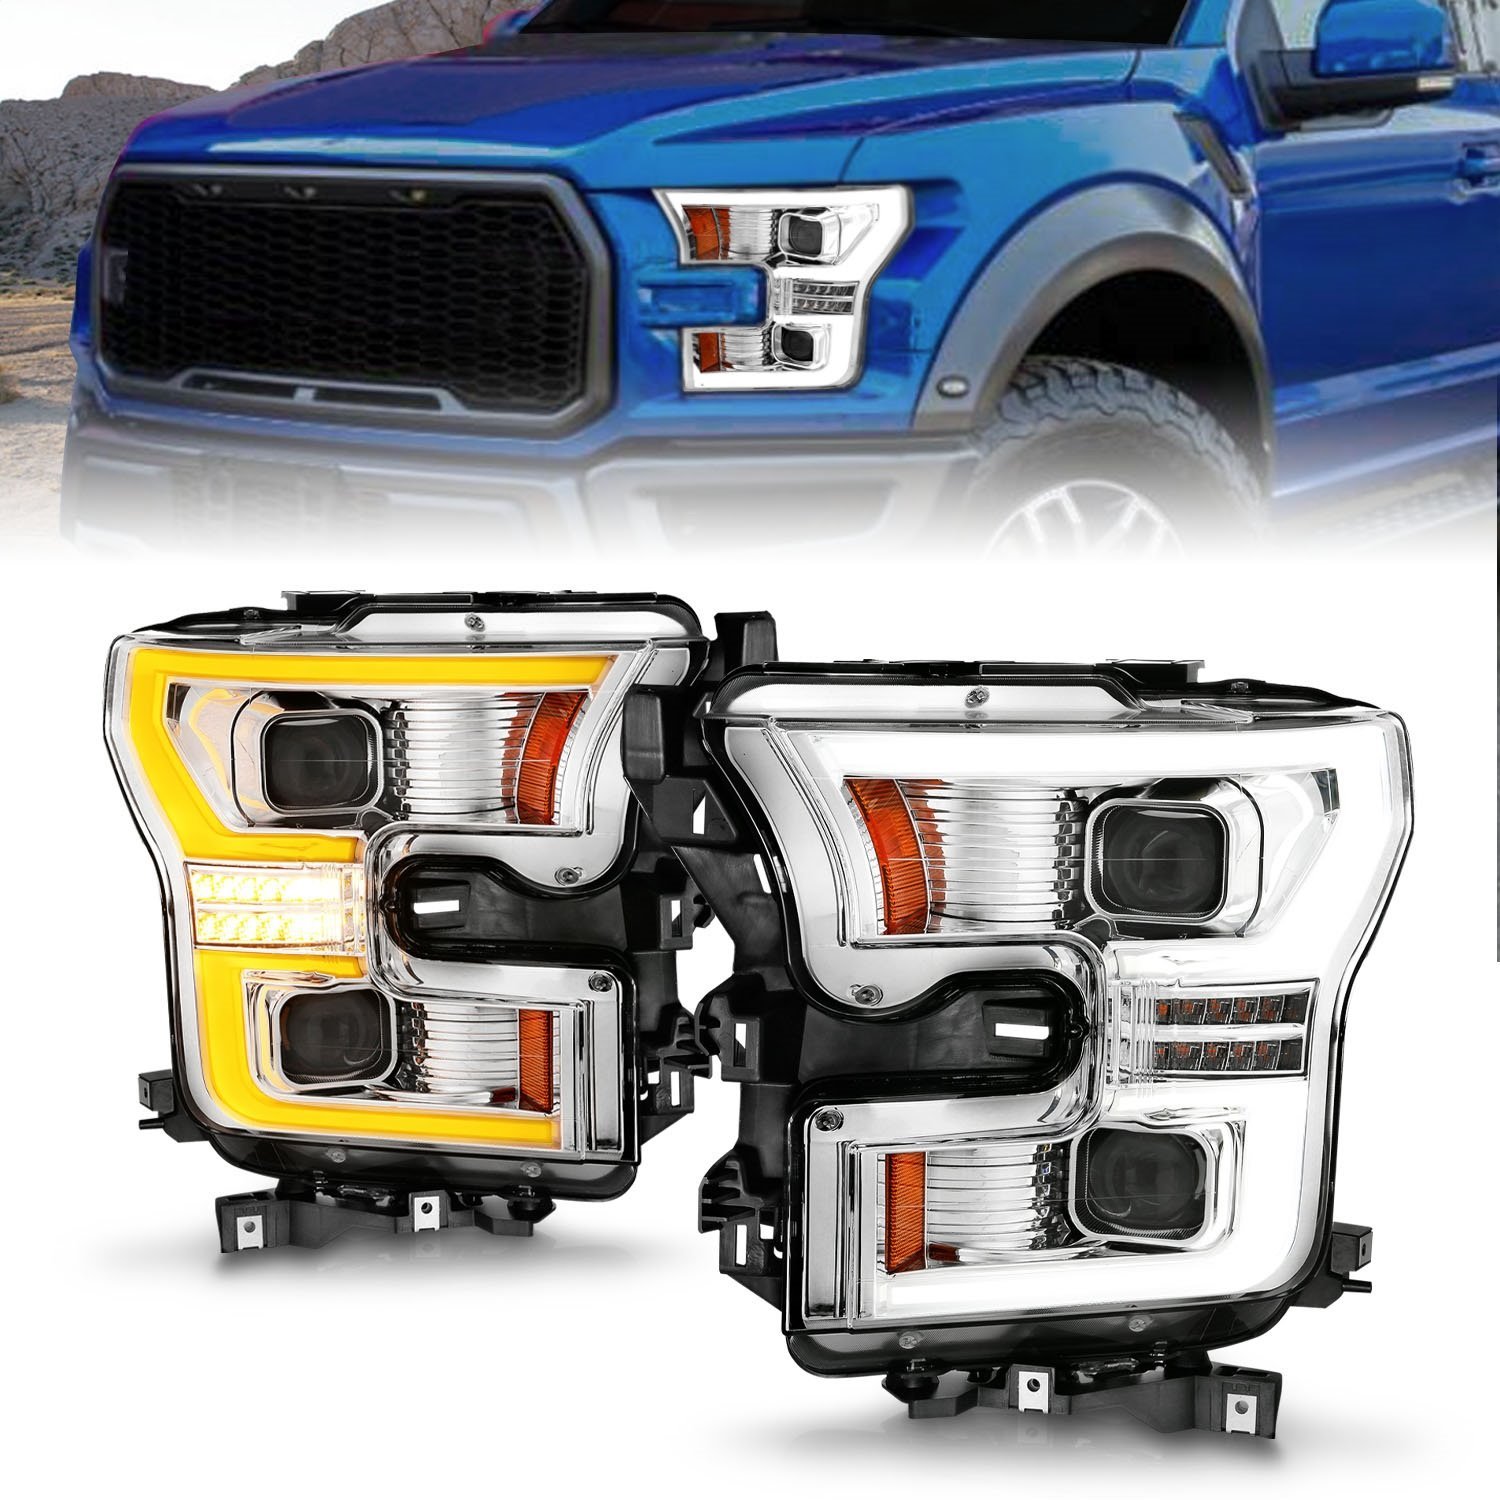 111605 LED Projector Chrome Housing Headlights Fits 2015-2017 Ford F-150 Models